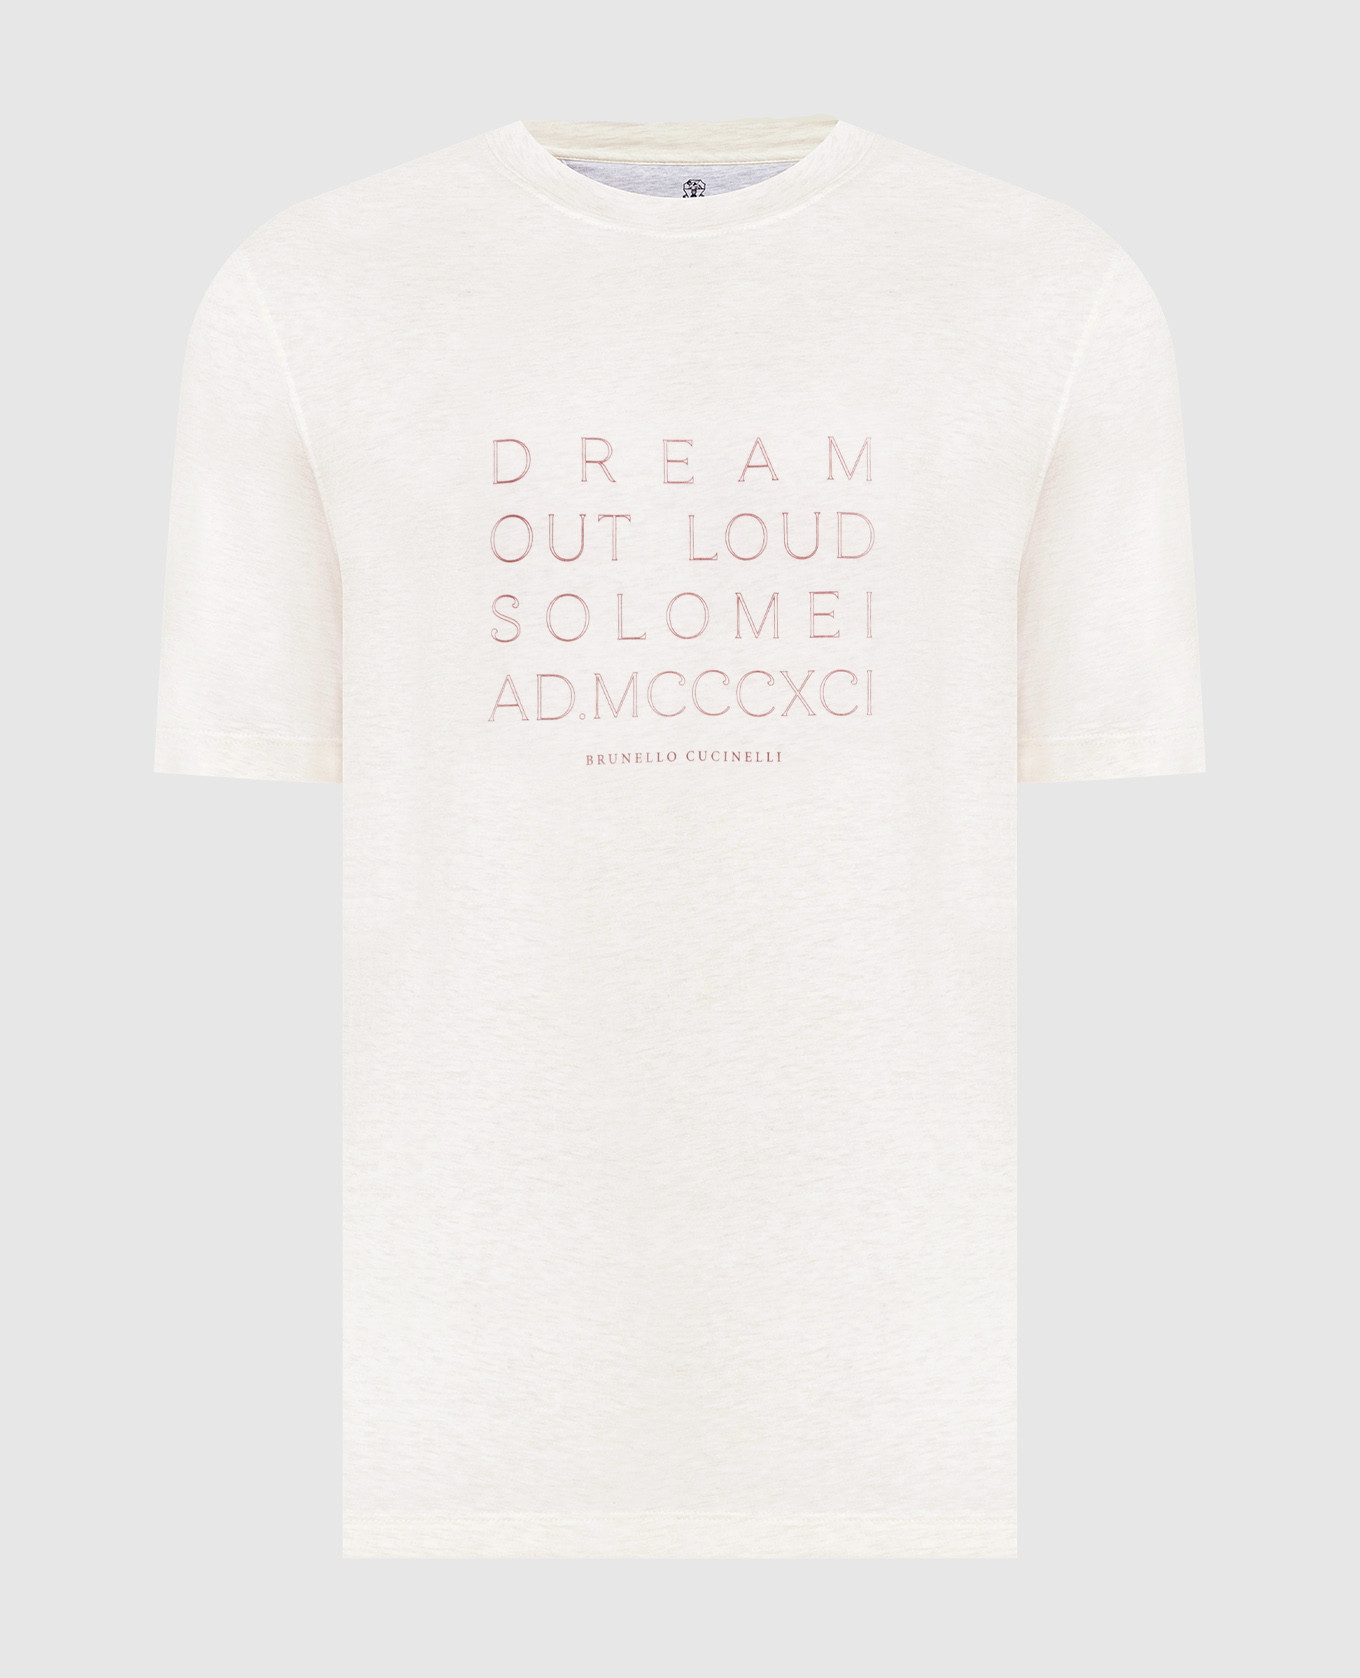 Gray melange t-shirt with Dream out loud print